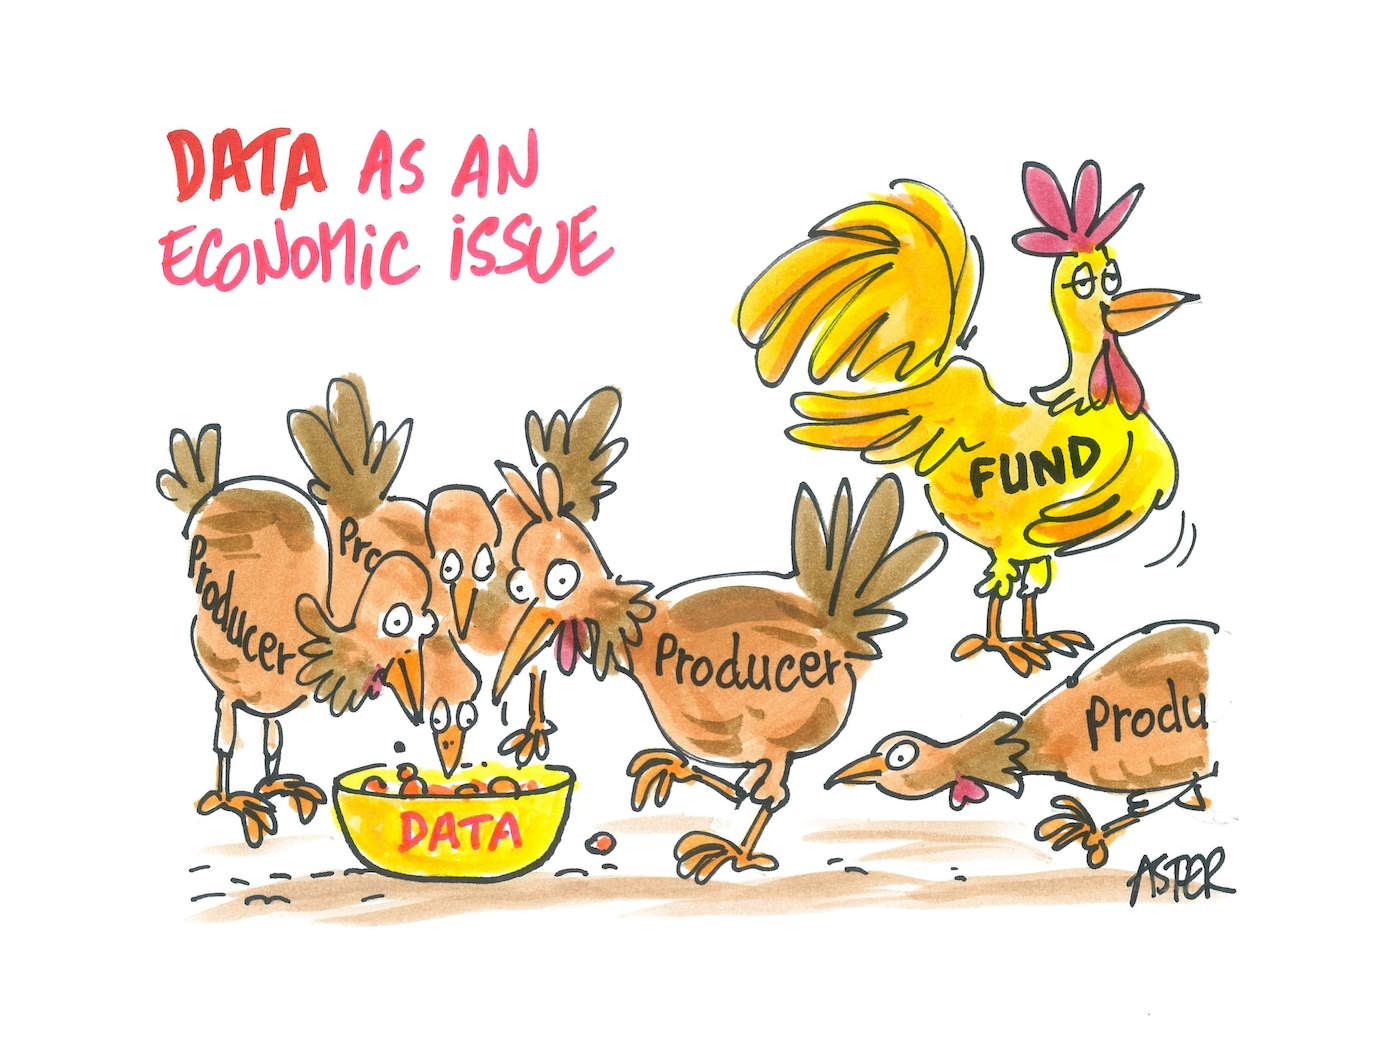 Data as an Econominc Issue